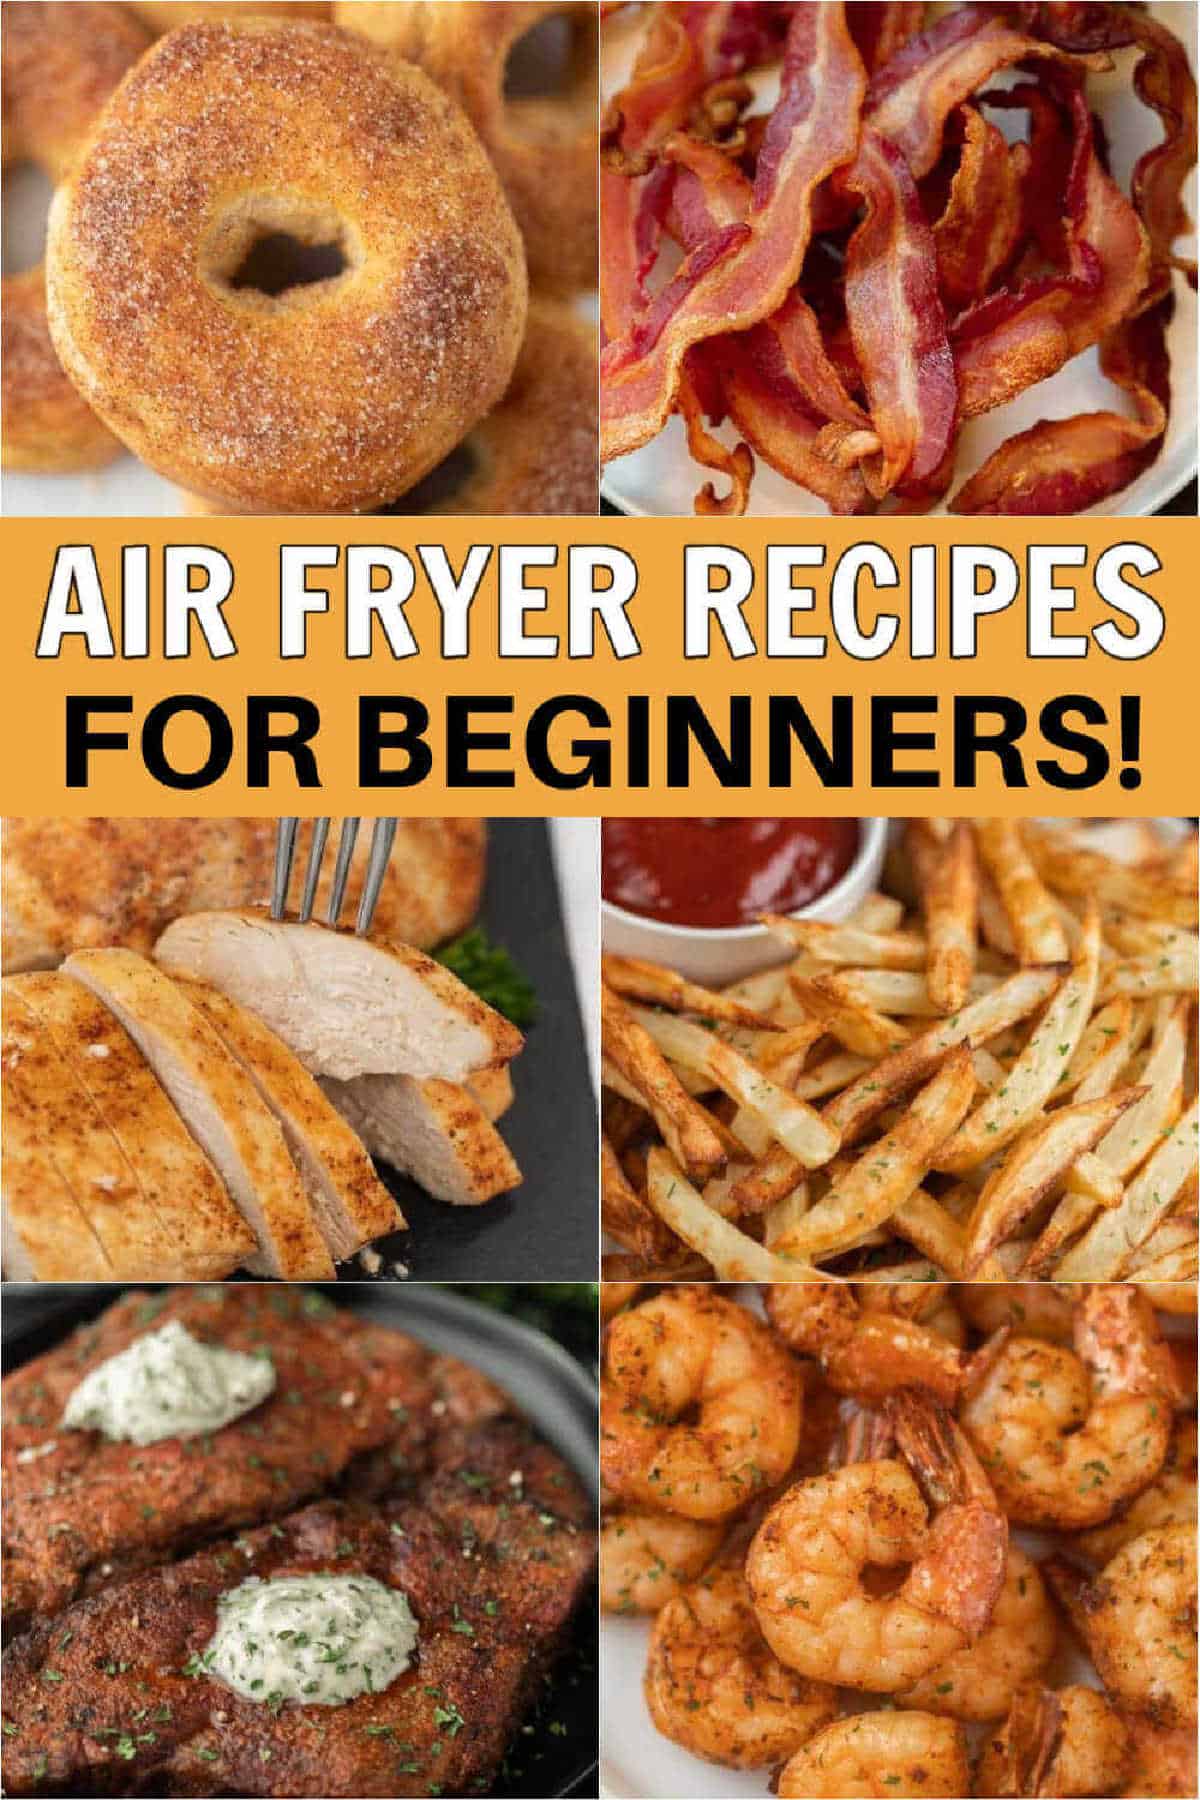 The Reason A Thermometer Is Still Useful When Air Frying Foods